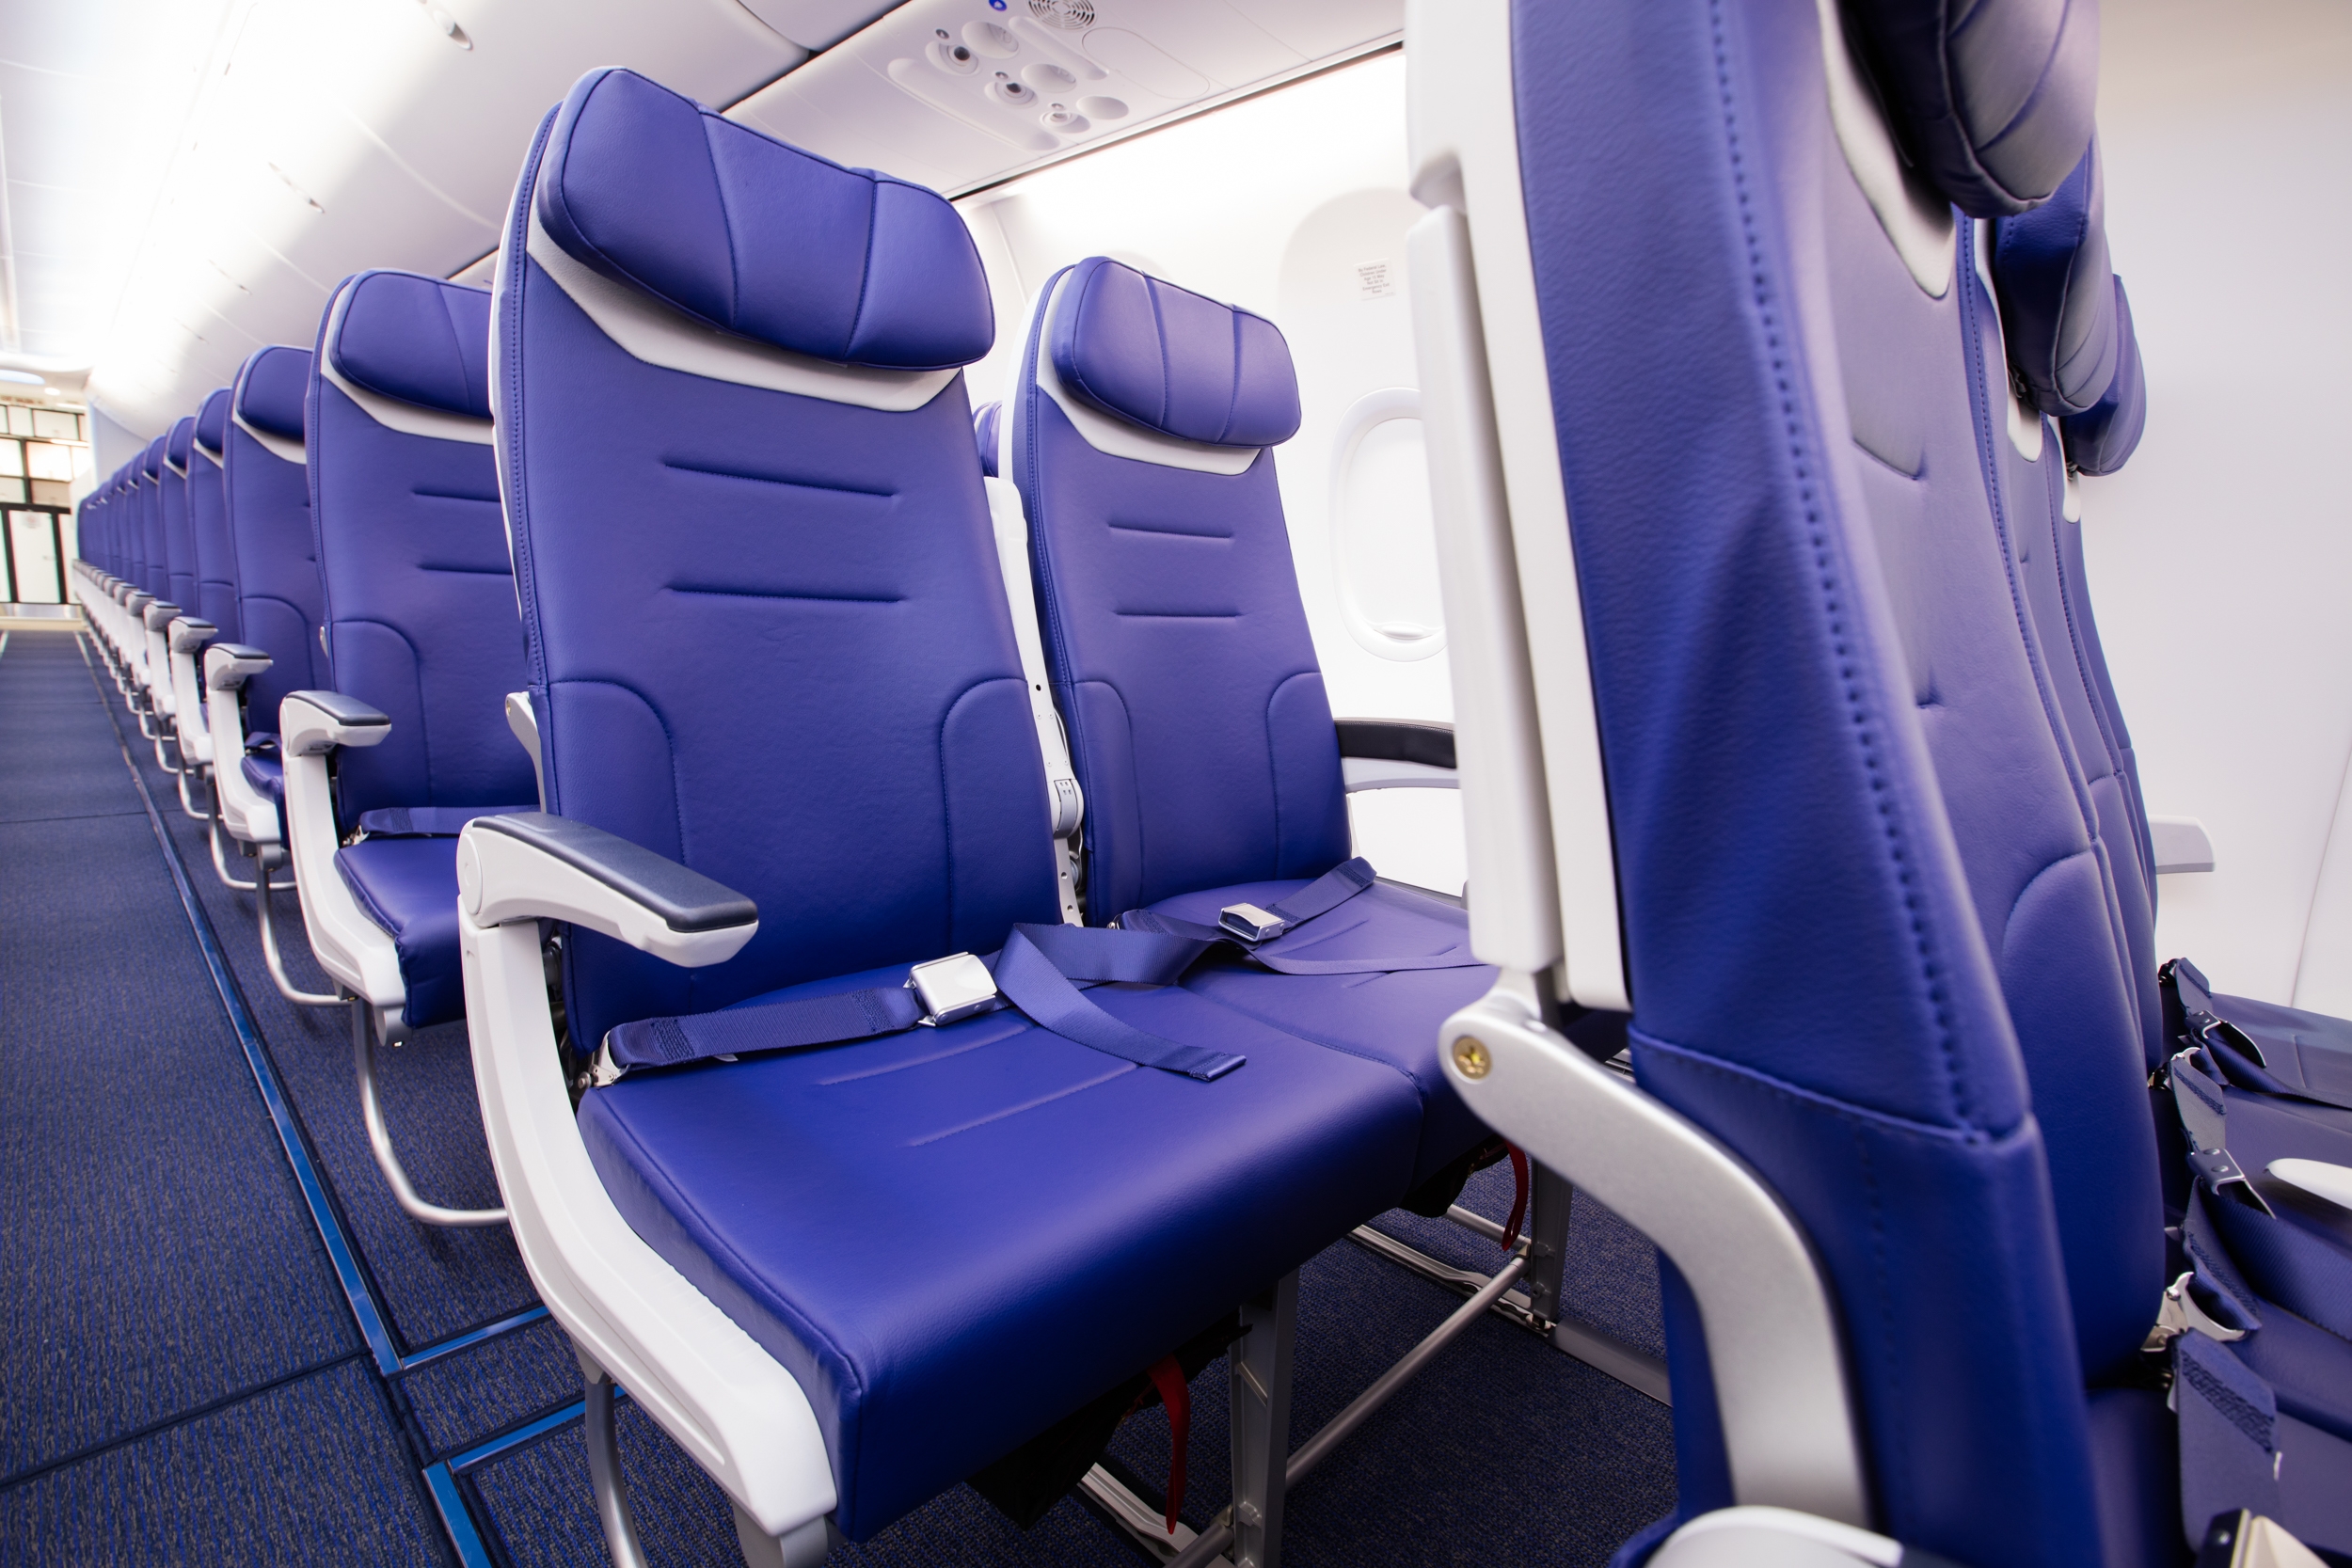 Southwest Unveils New Uniforms And Widest 737 Economy Seat In The Market